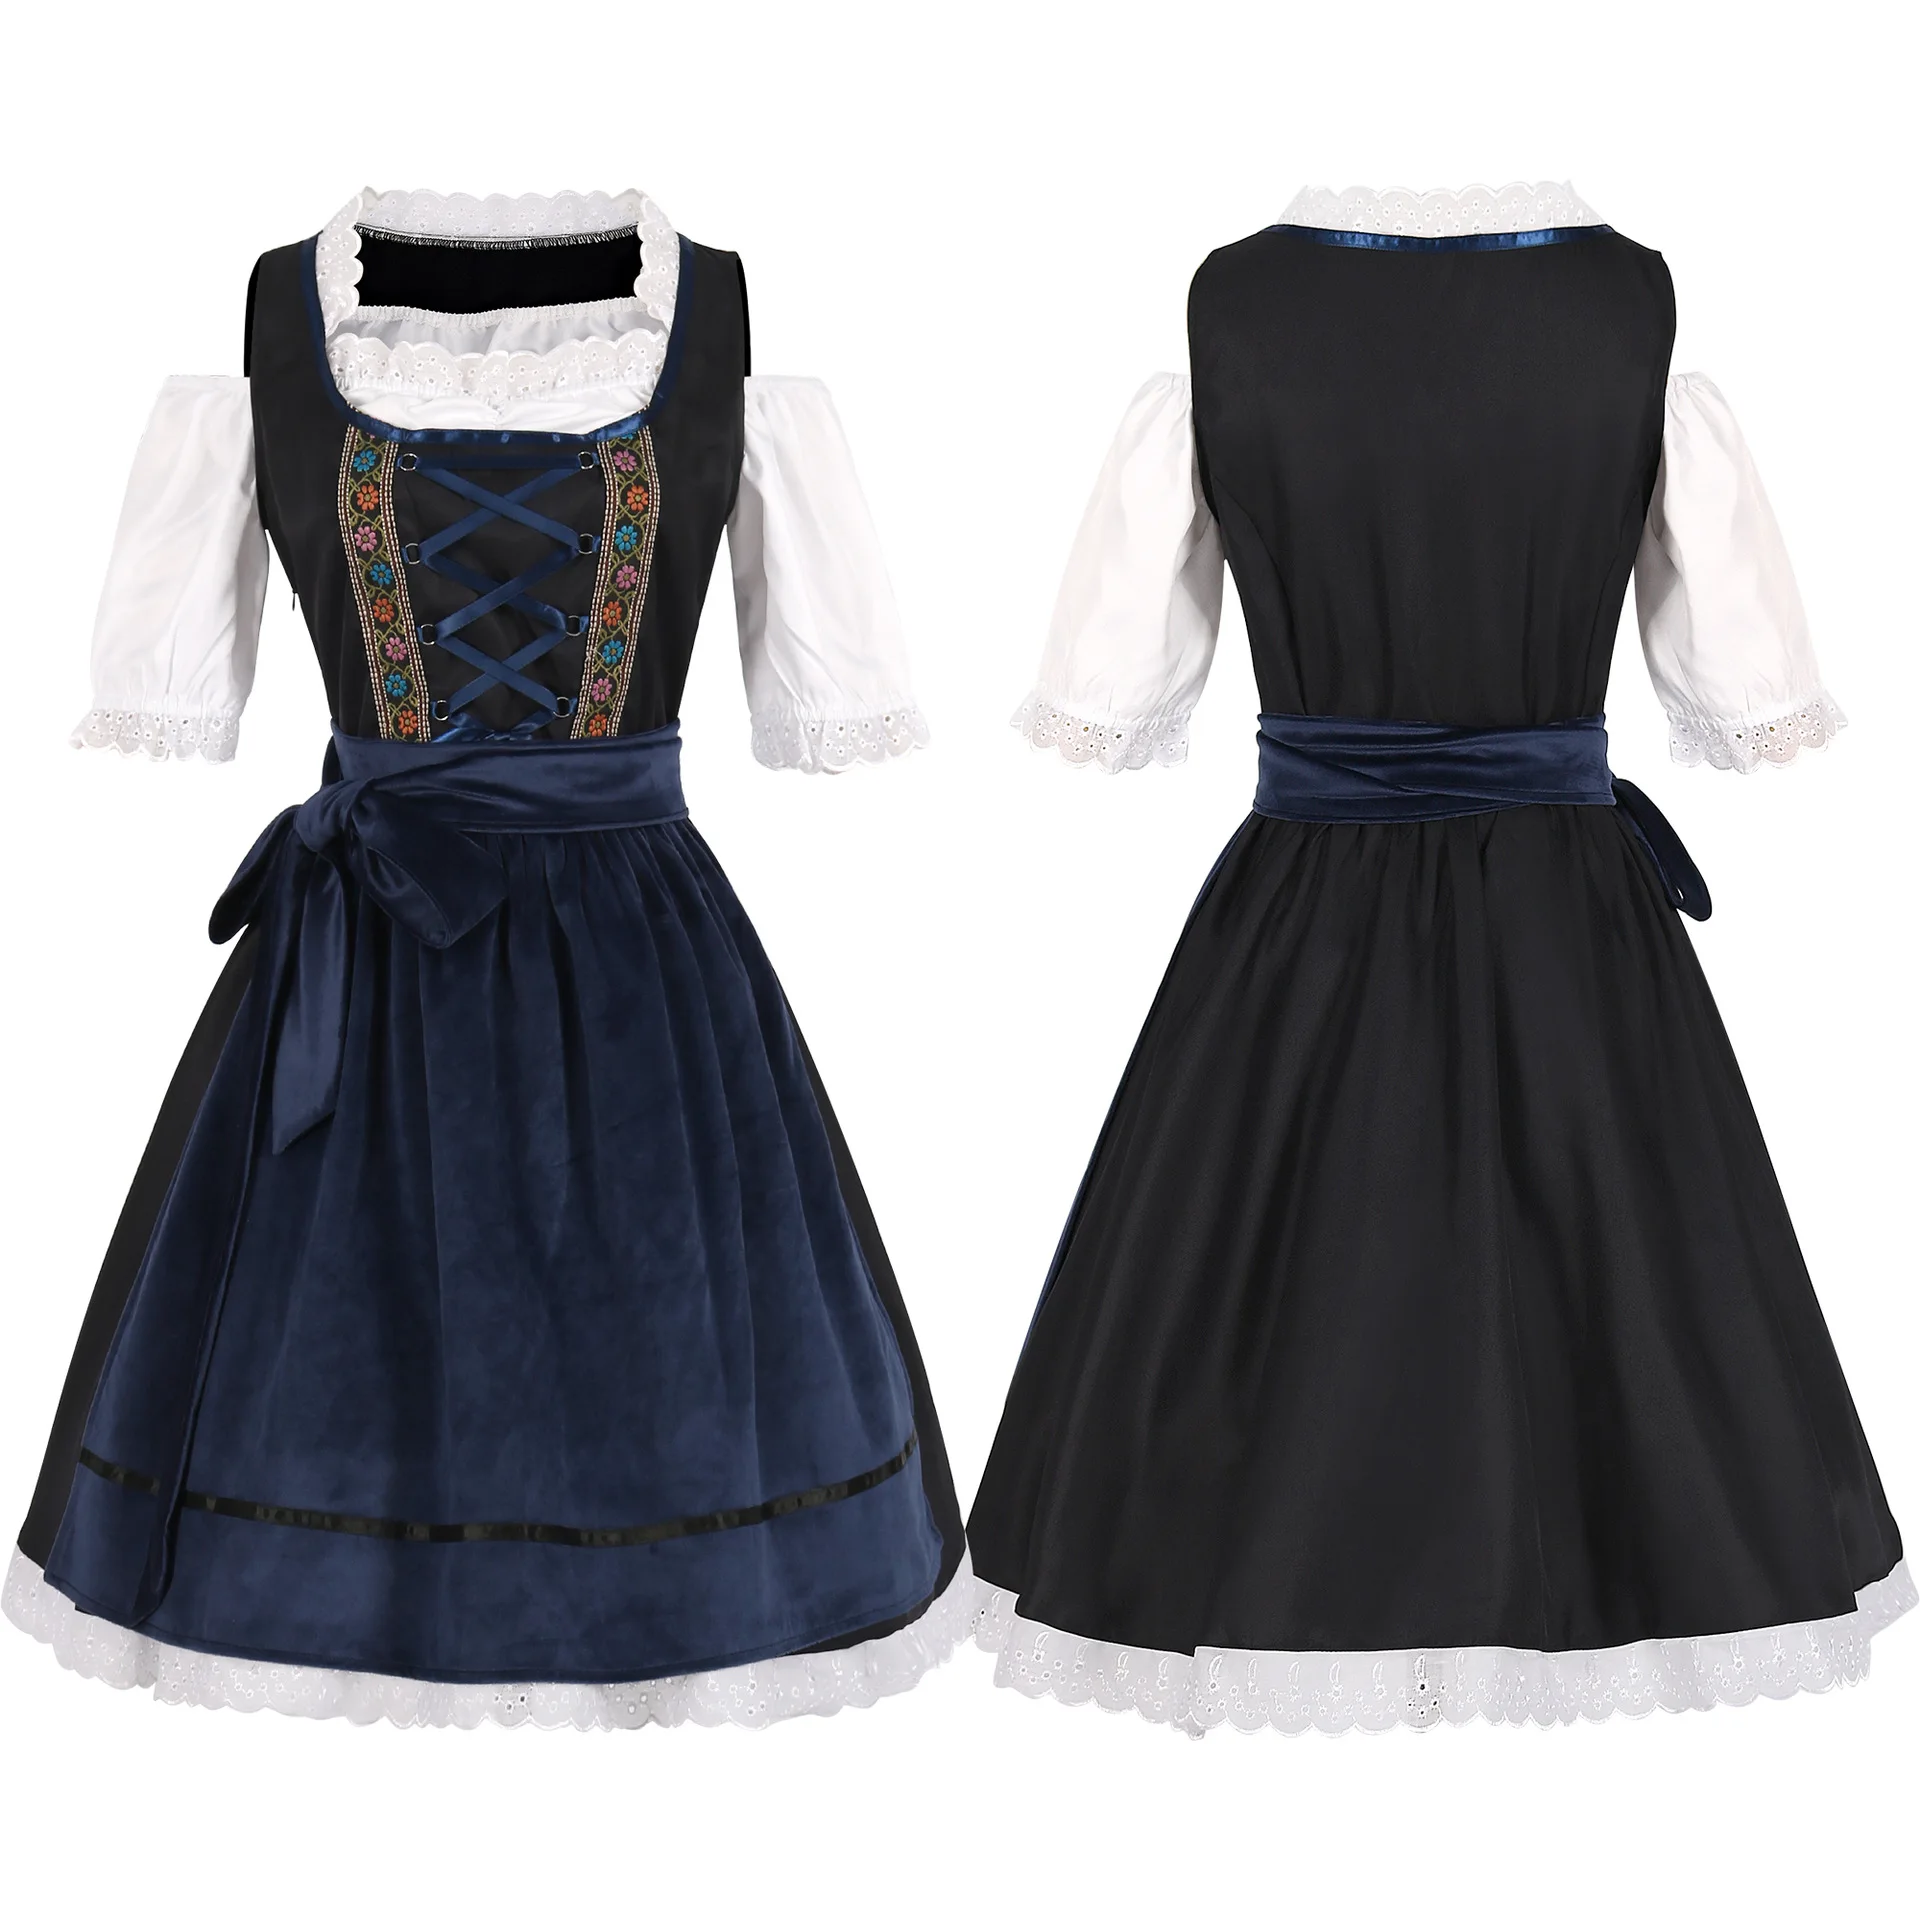 

Lace-Up Oktoberfest Dress With Apron Festival Traditional Bavarian Beer Costumes German Dirndl Party Dresses